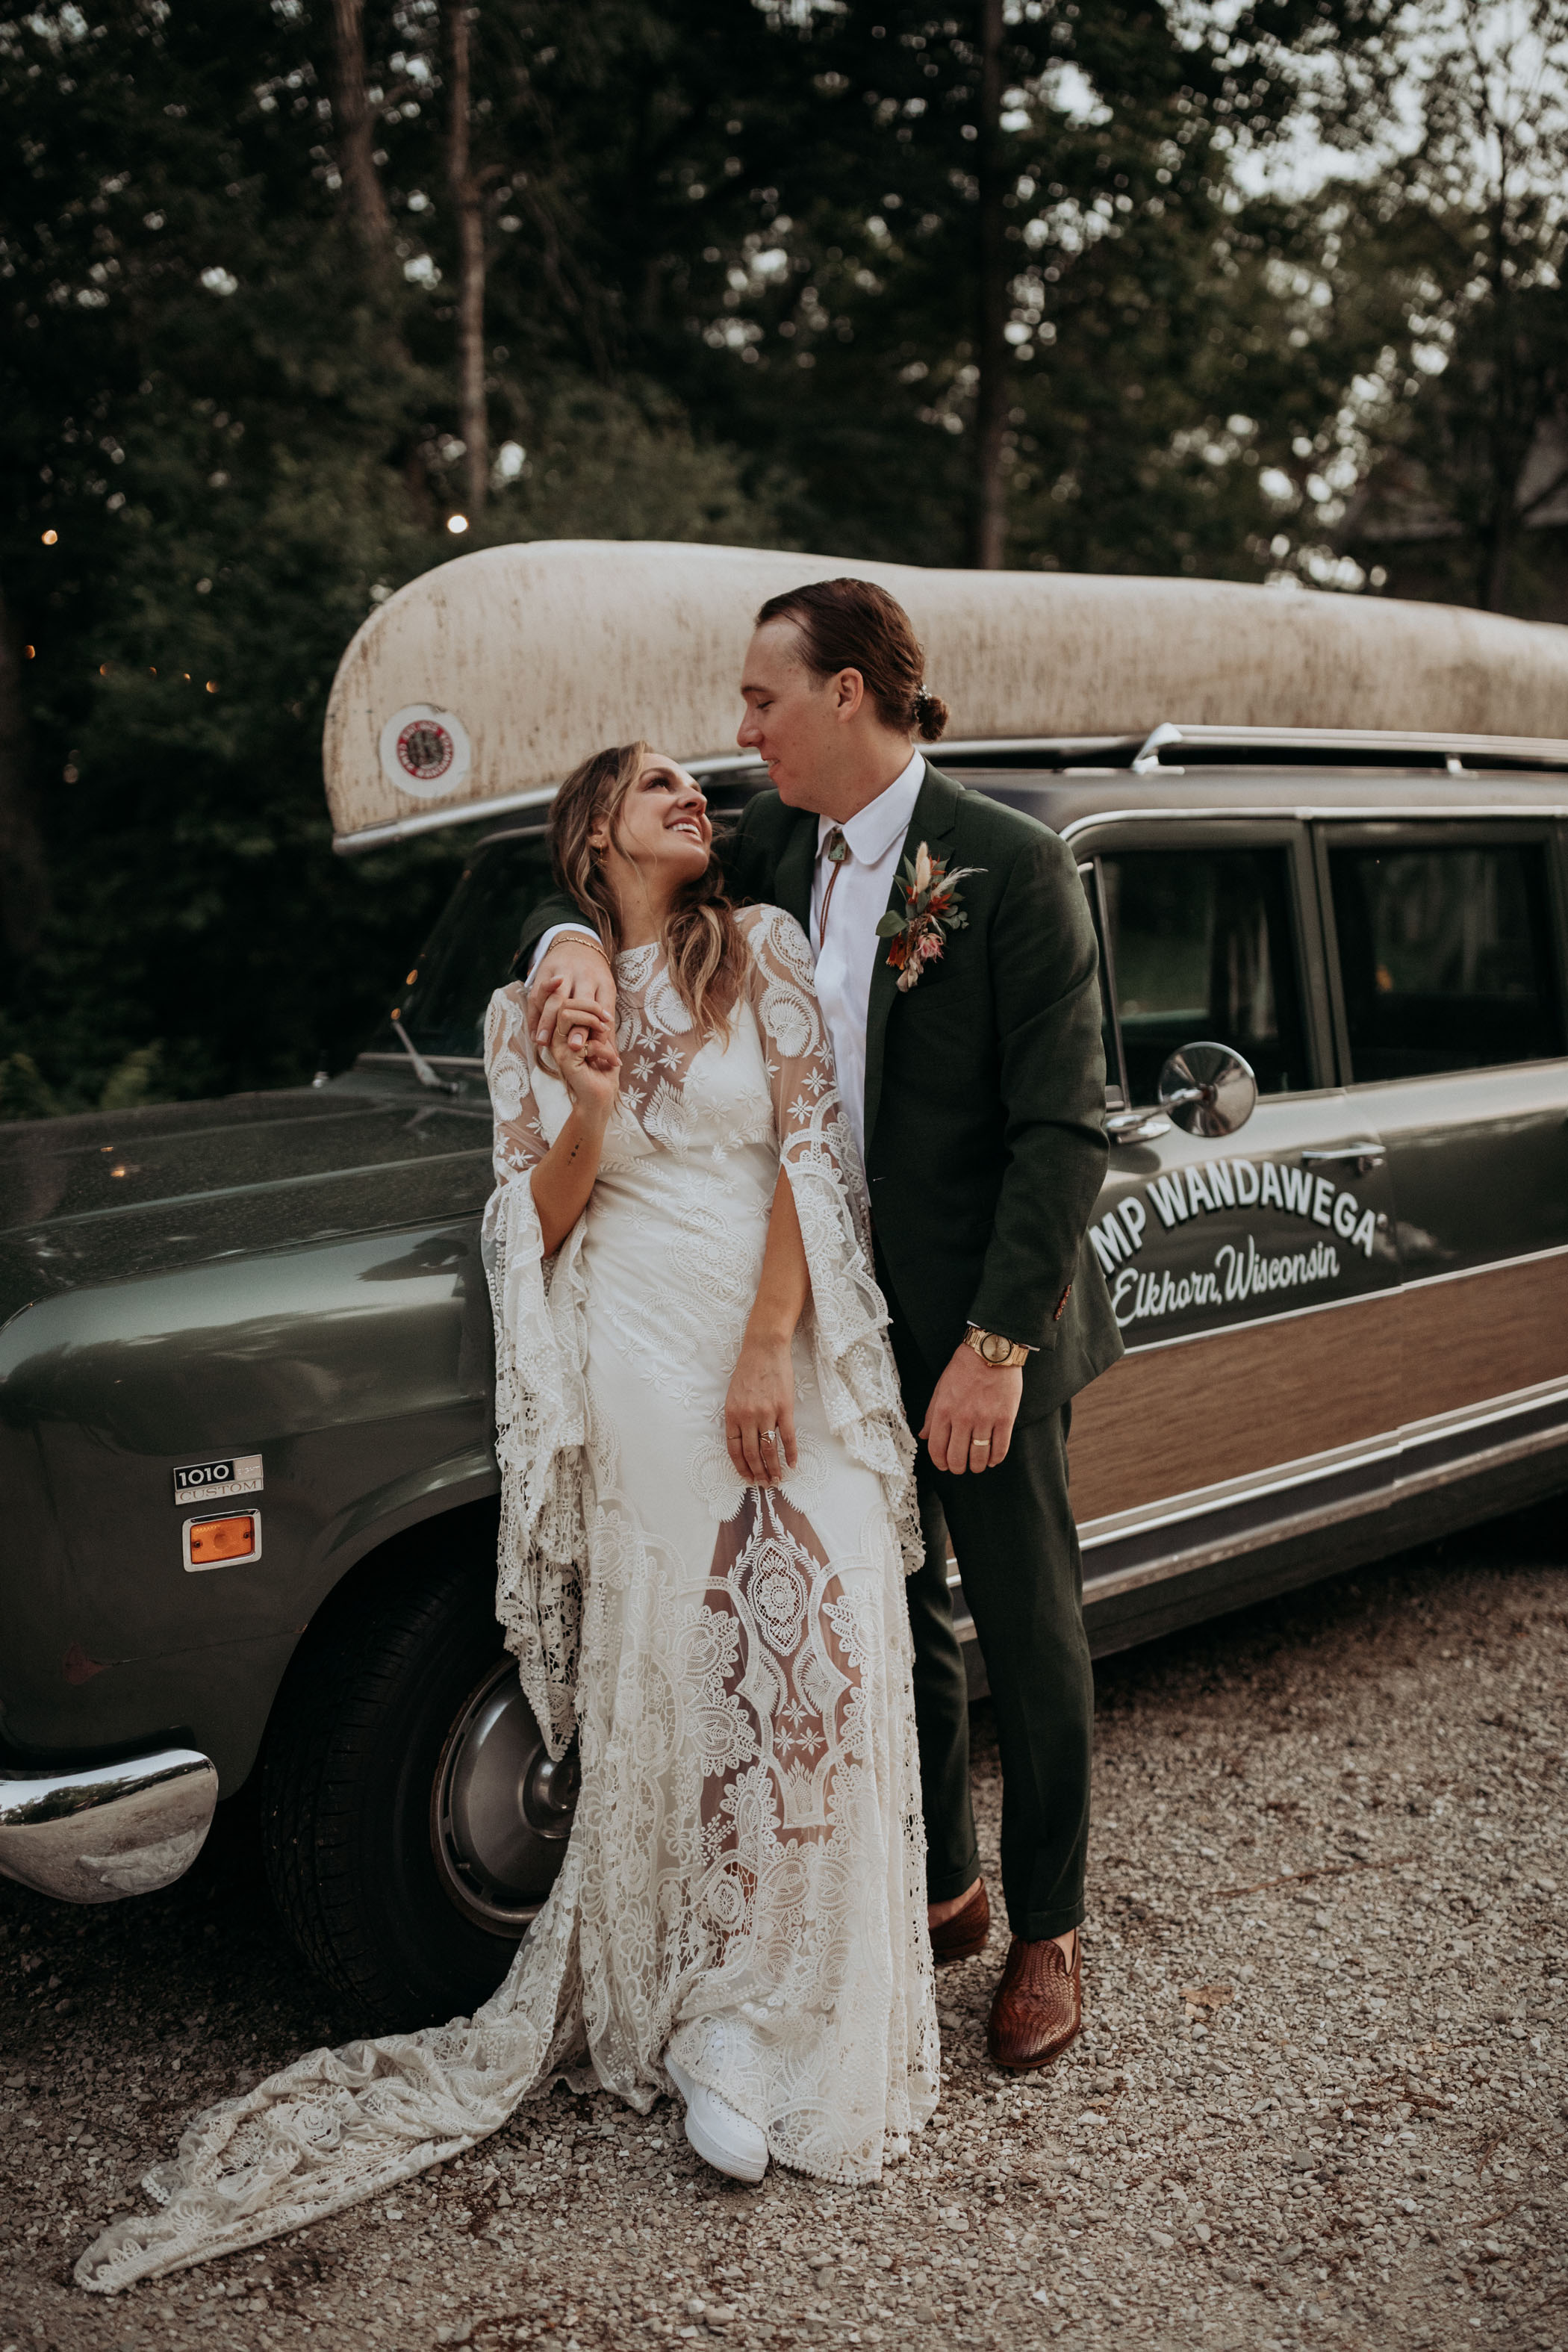 The Vibes at This Festival-Themed Wedding Held at a Summer Camp Were Perfectly on Point